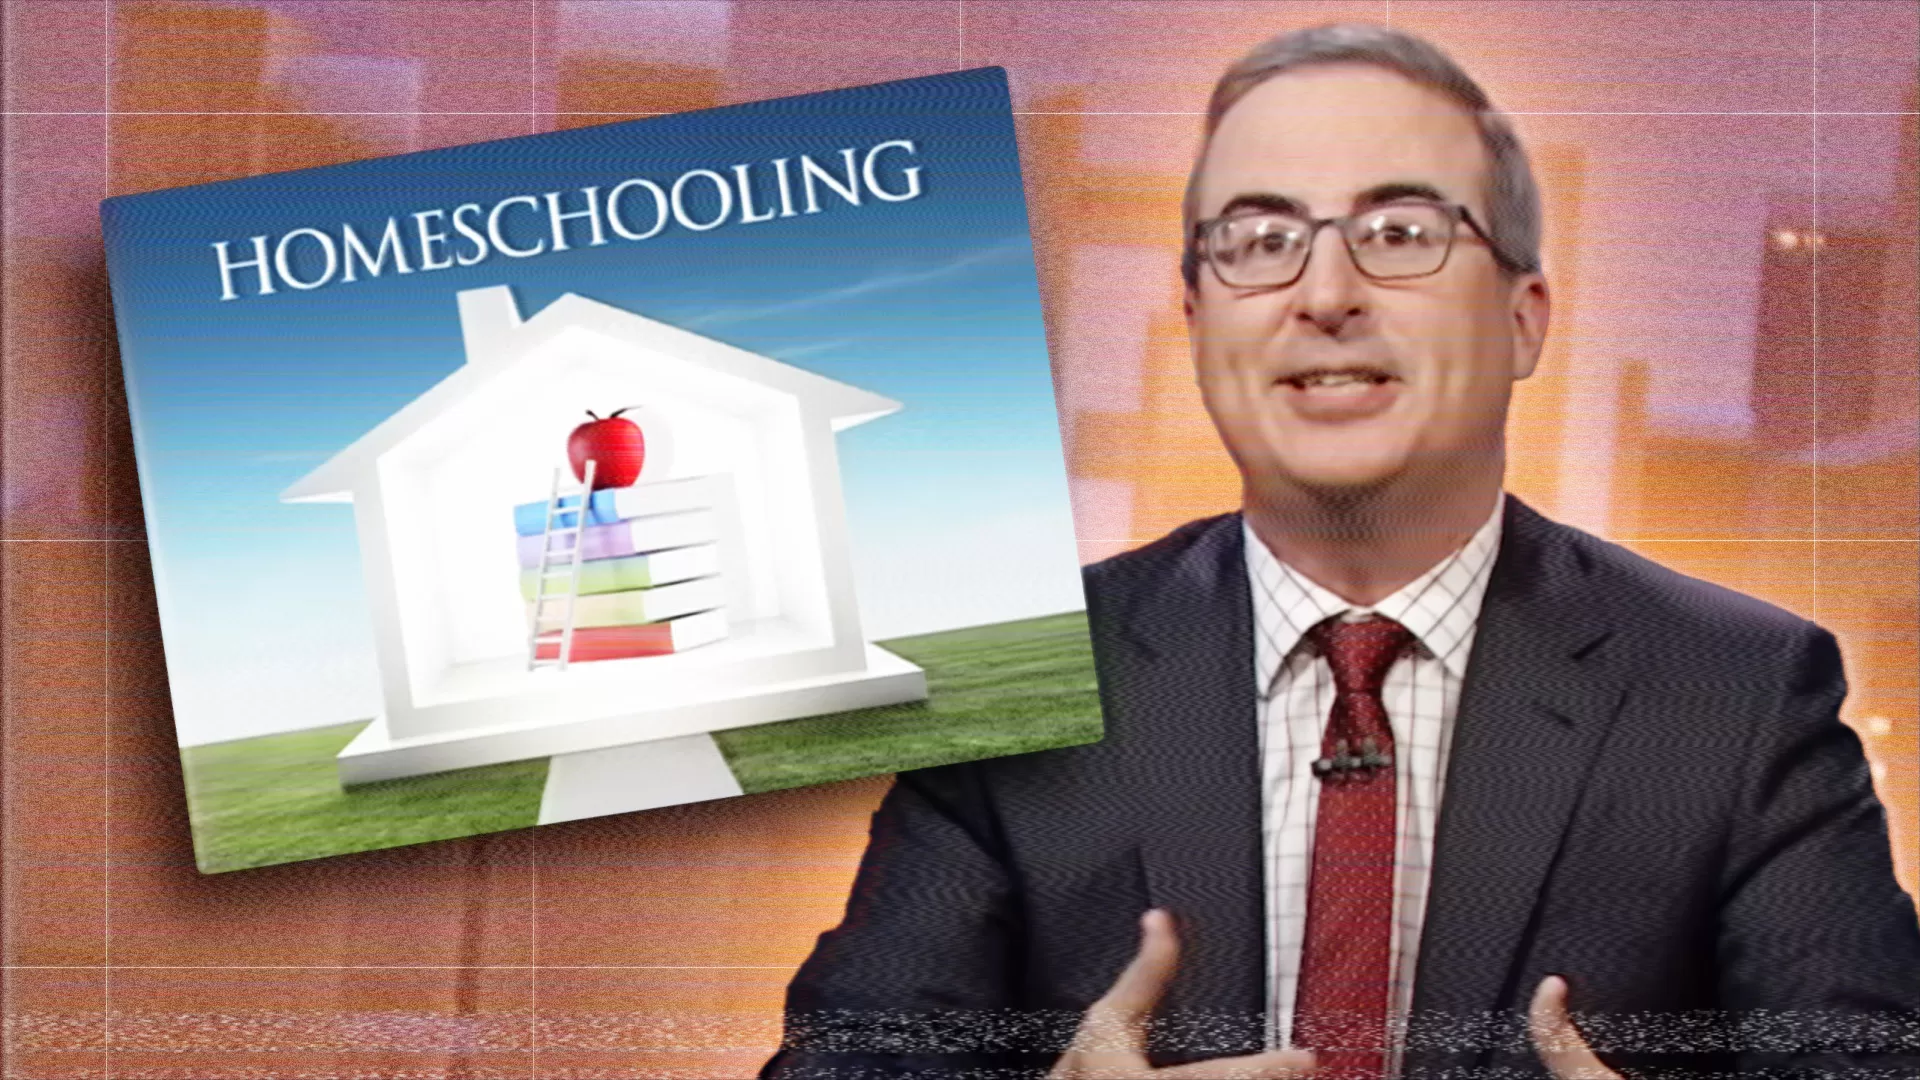 John Oliver on Homeschooling: “Some Parents Running the Homeschool Institute of Dishwashing and Others Running Lil Nazis R Us”